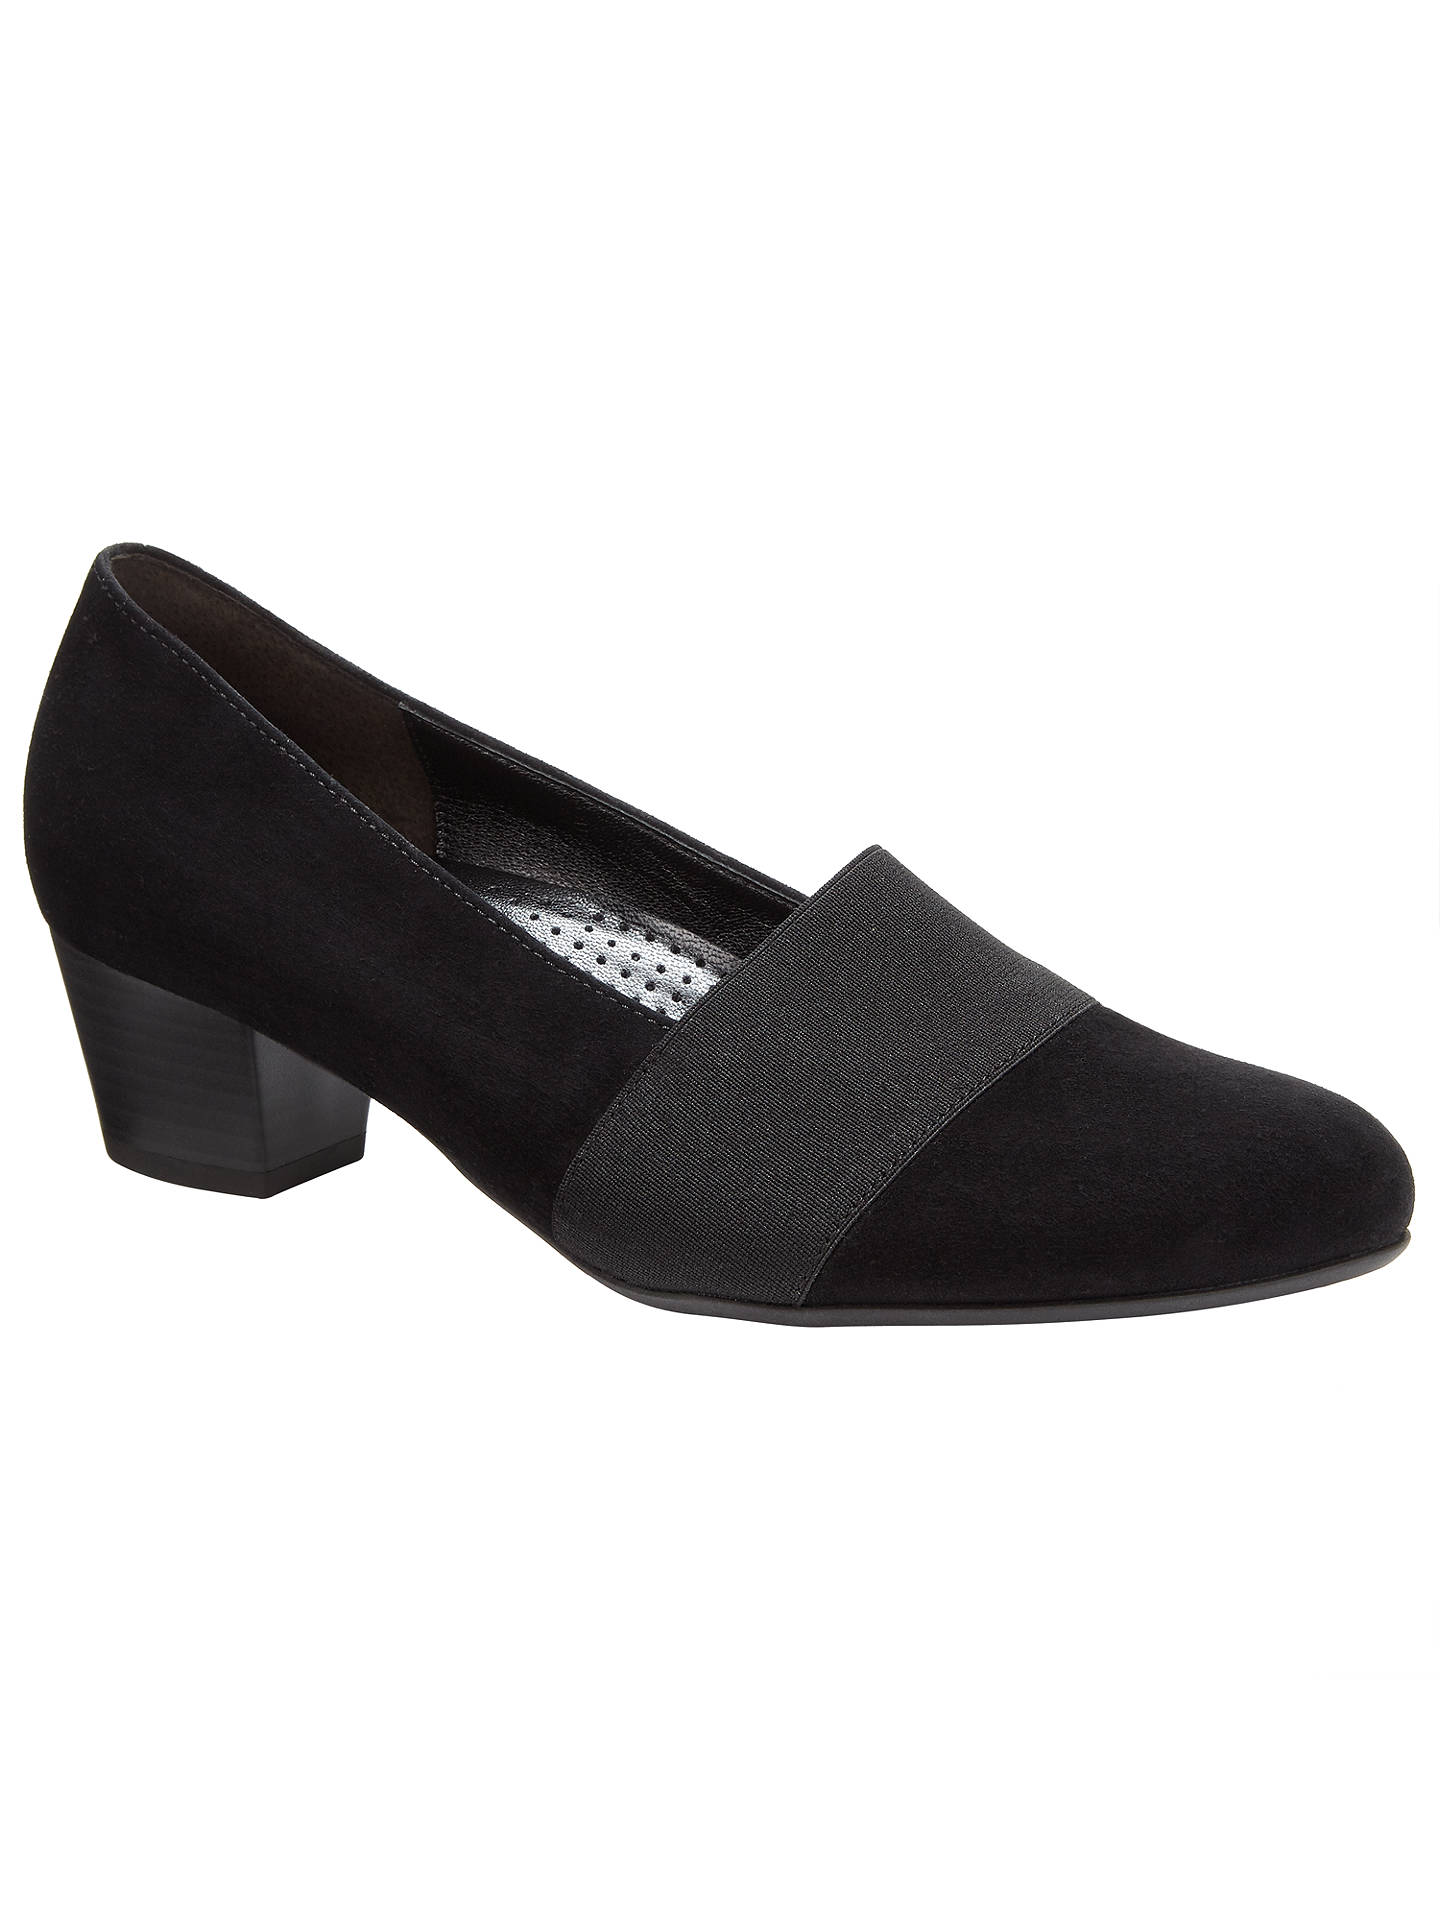 Gabor Sovereign Wide Fit Suede Court Shoes, Black at John Lewis & Partners